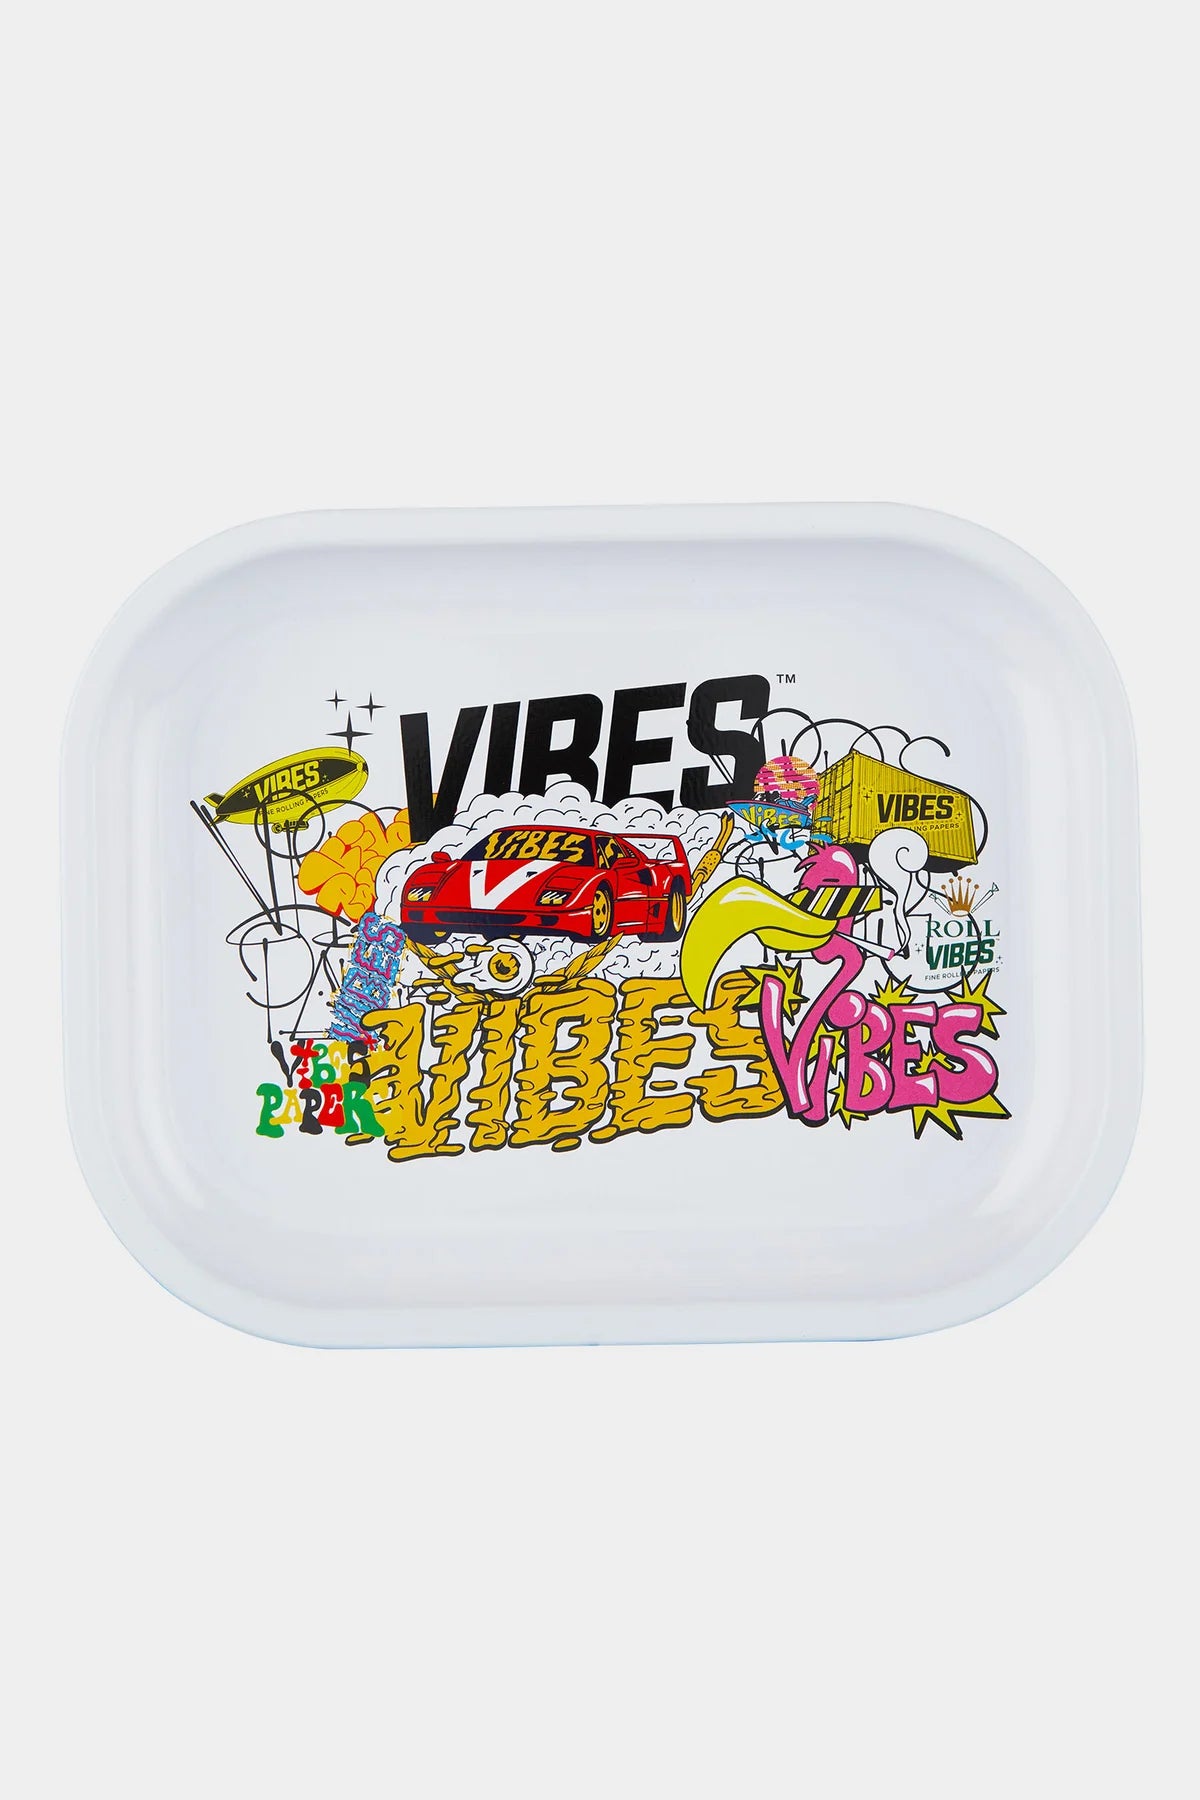 VIBES Rolling Tray Large Collage